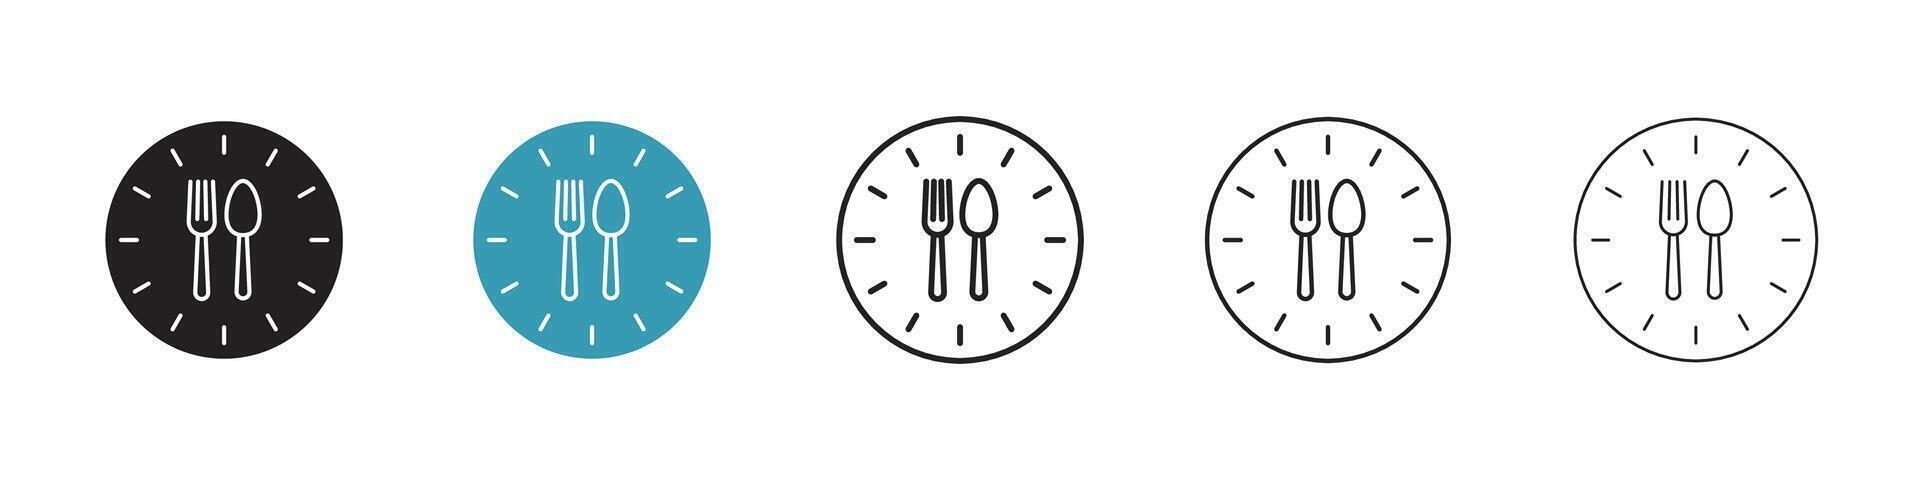 Lunch time icon vector